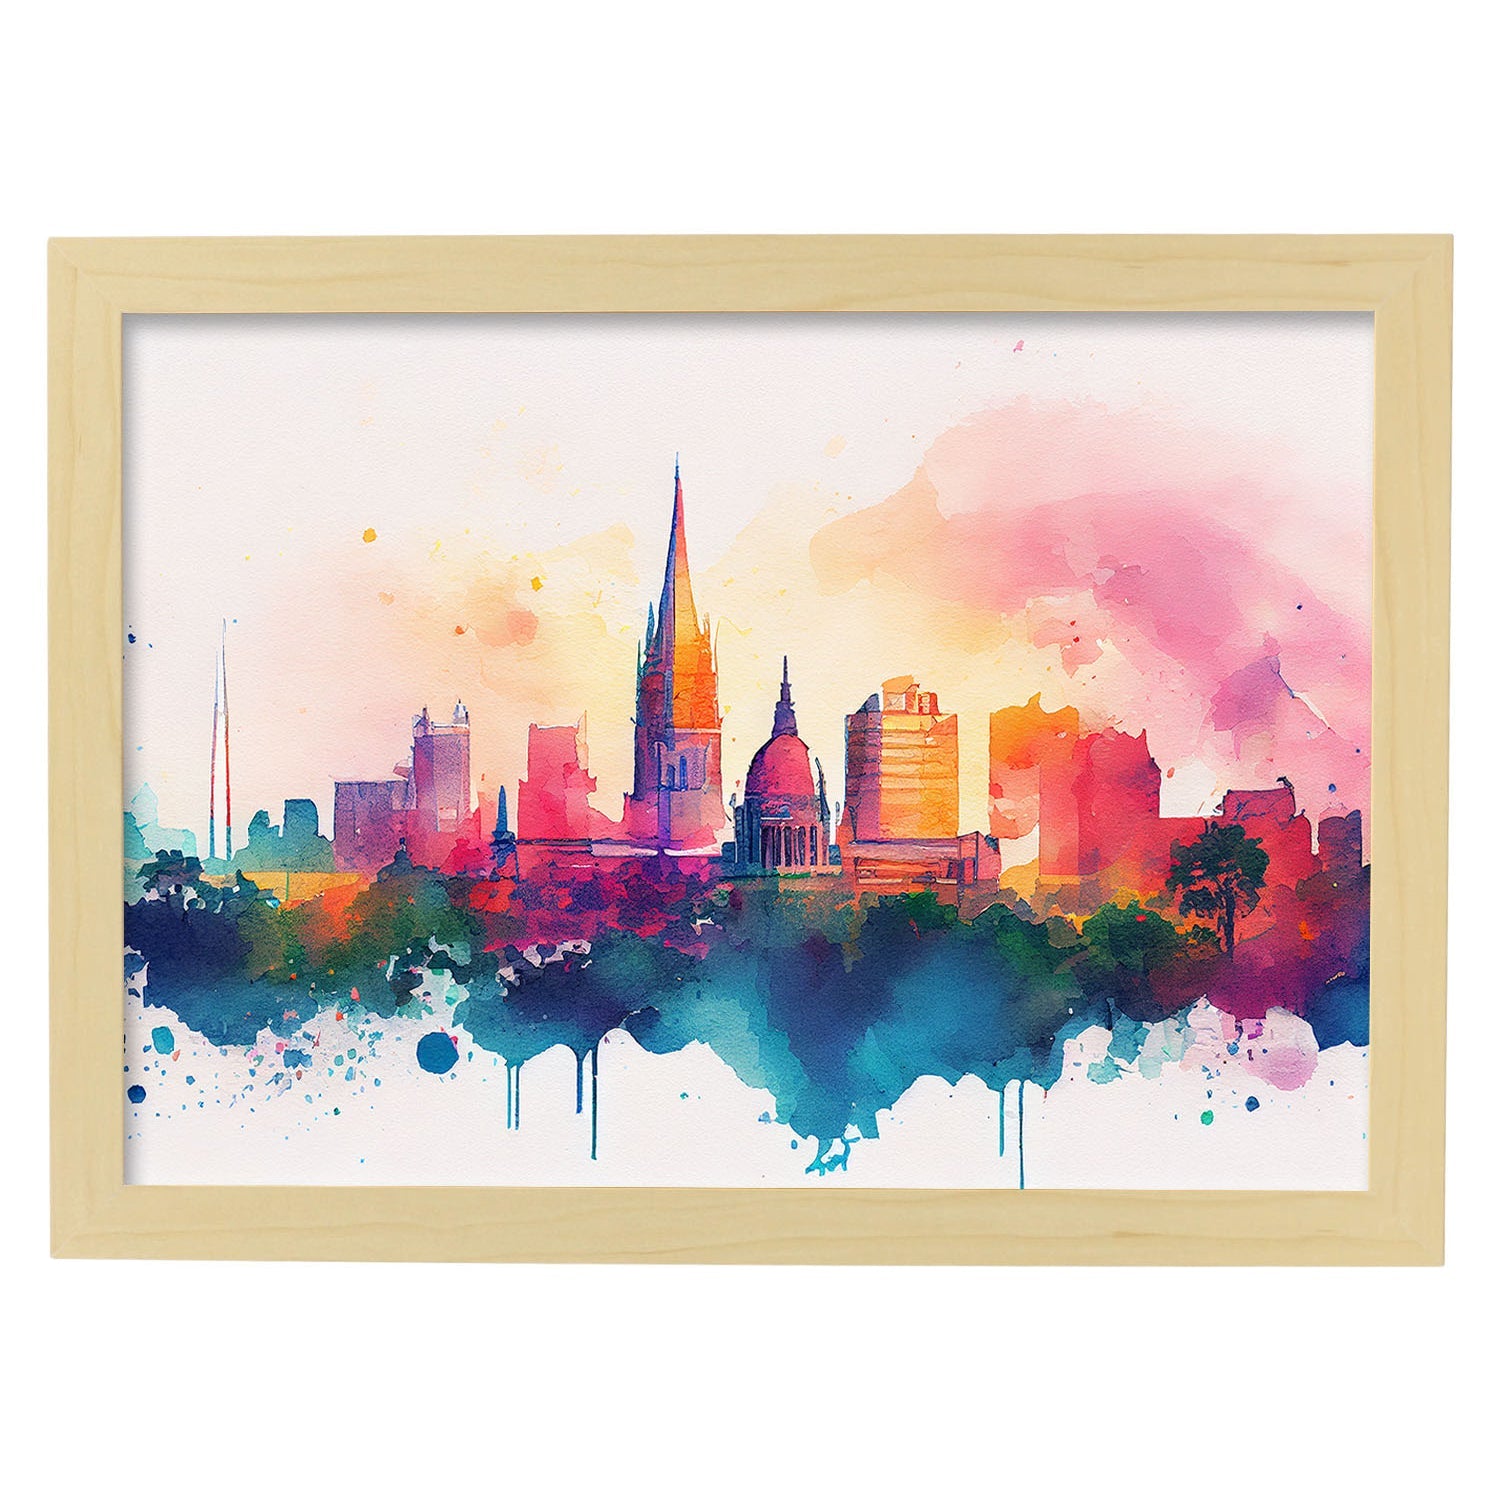 Nacnic watercolor of a skyline of the city of Bangalore. Aesthetic Wall Art Prints for Bedroom or Living Room Design.-Artwork-Nacnic-A4-Marco Madera Clara-Nacnic Estudio SL